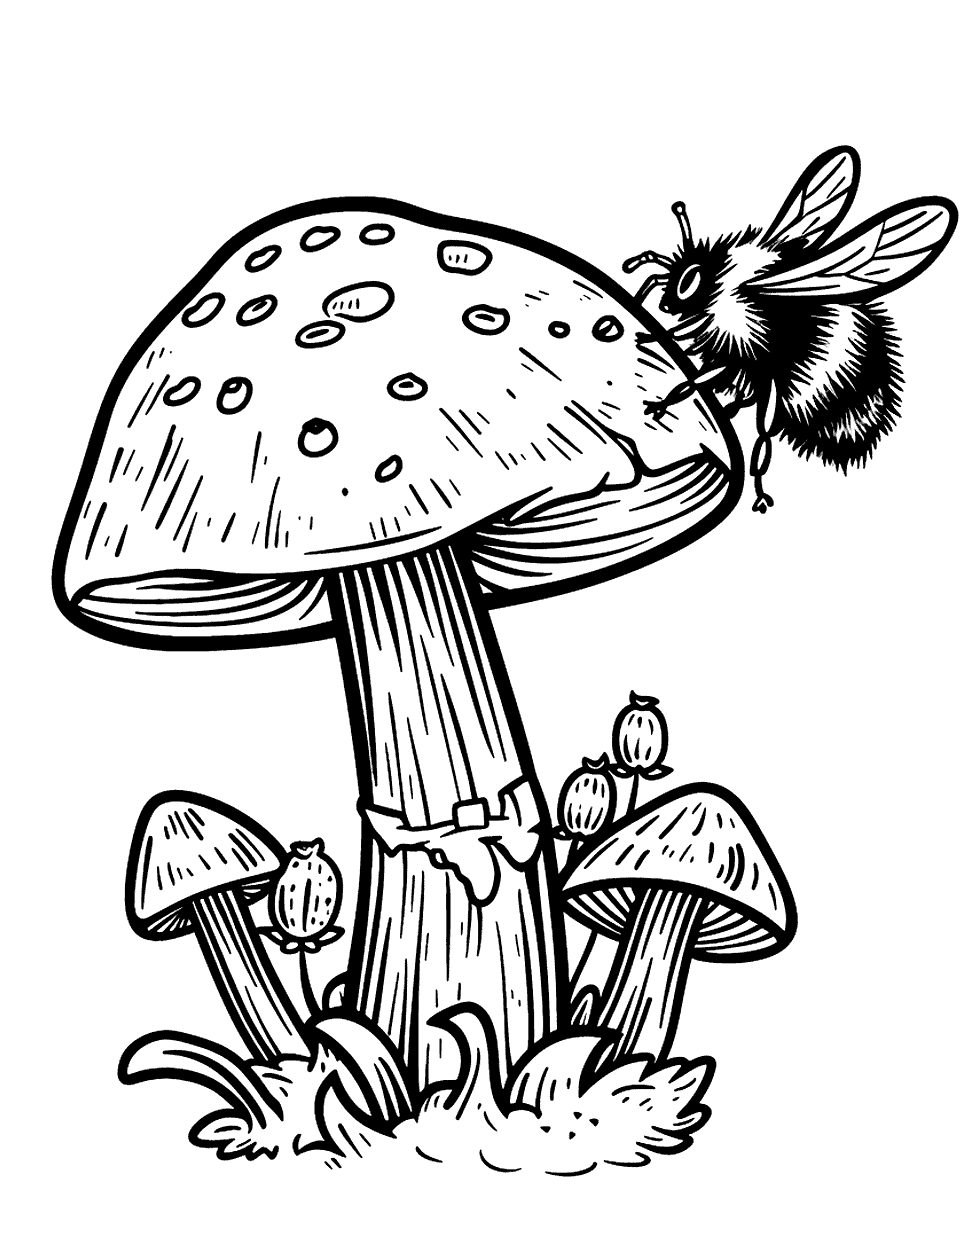 Bumblebee and Mushroom Coloring Page - A bumblebee on top of a mushroom, collecting pollen.